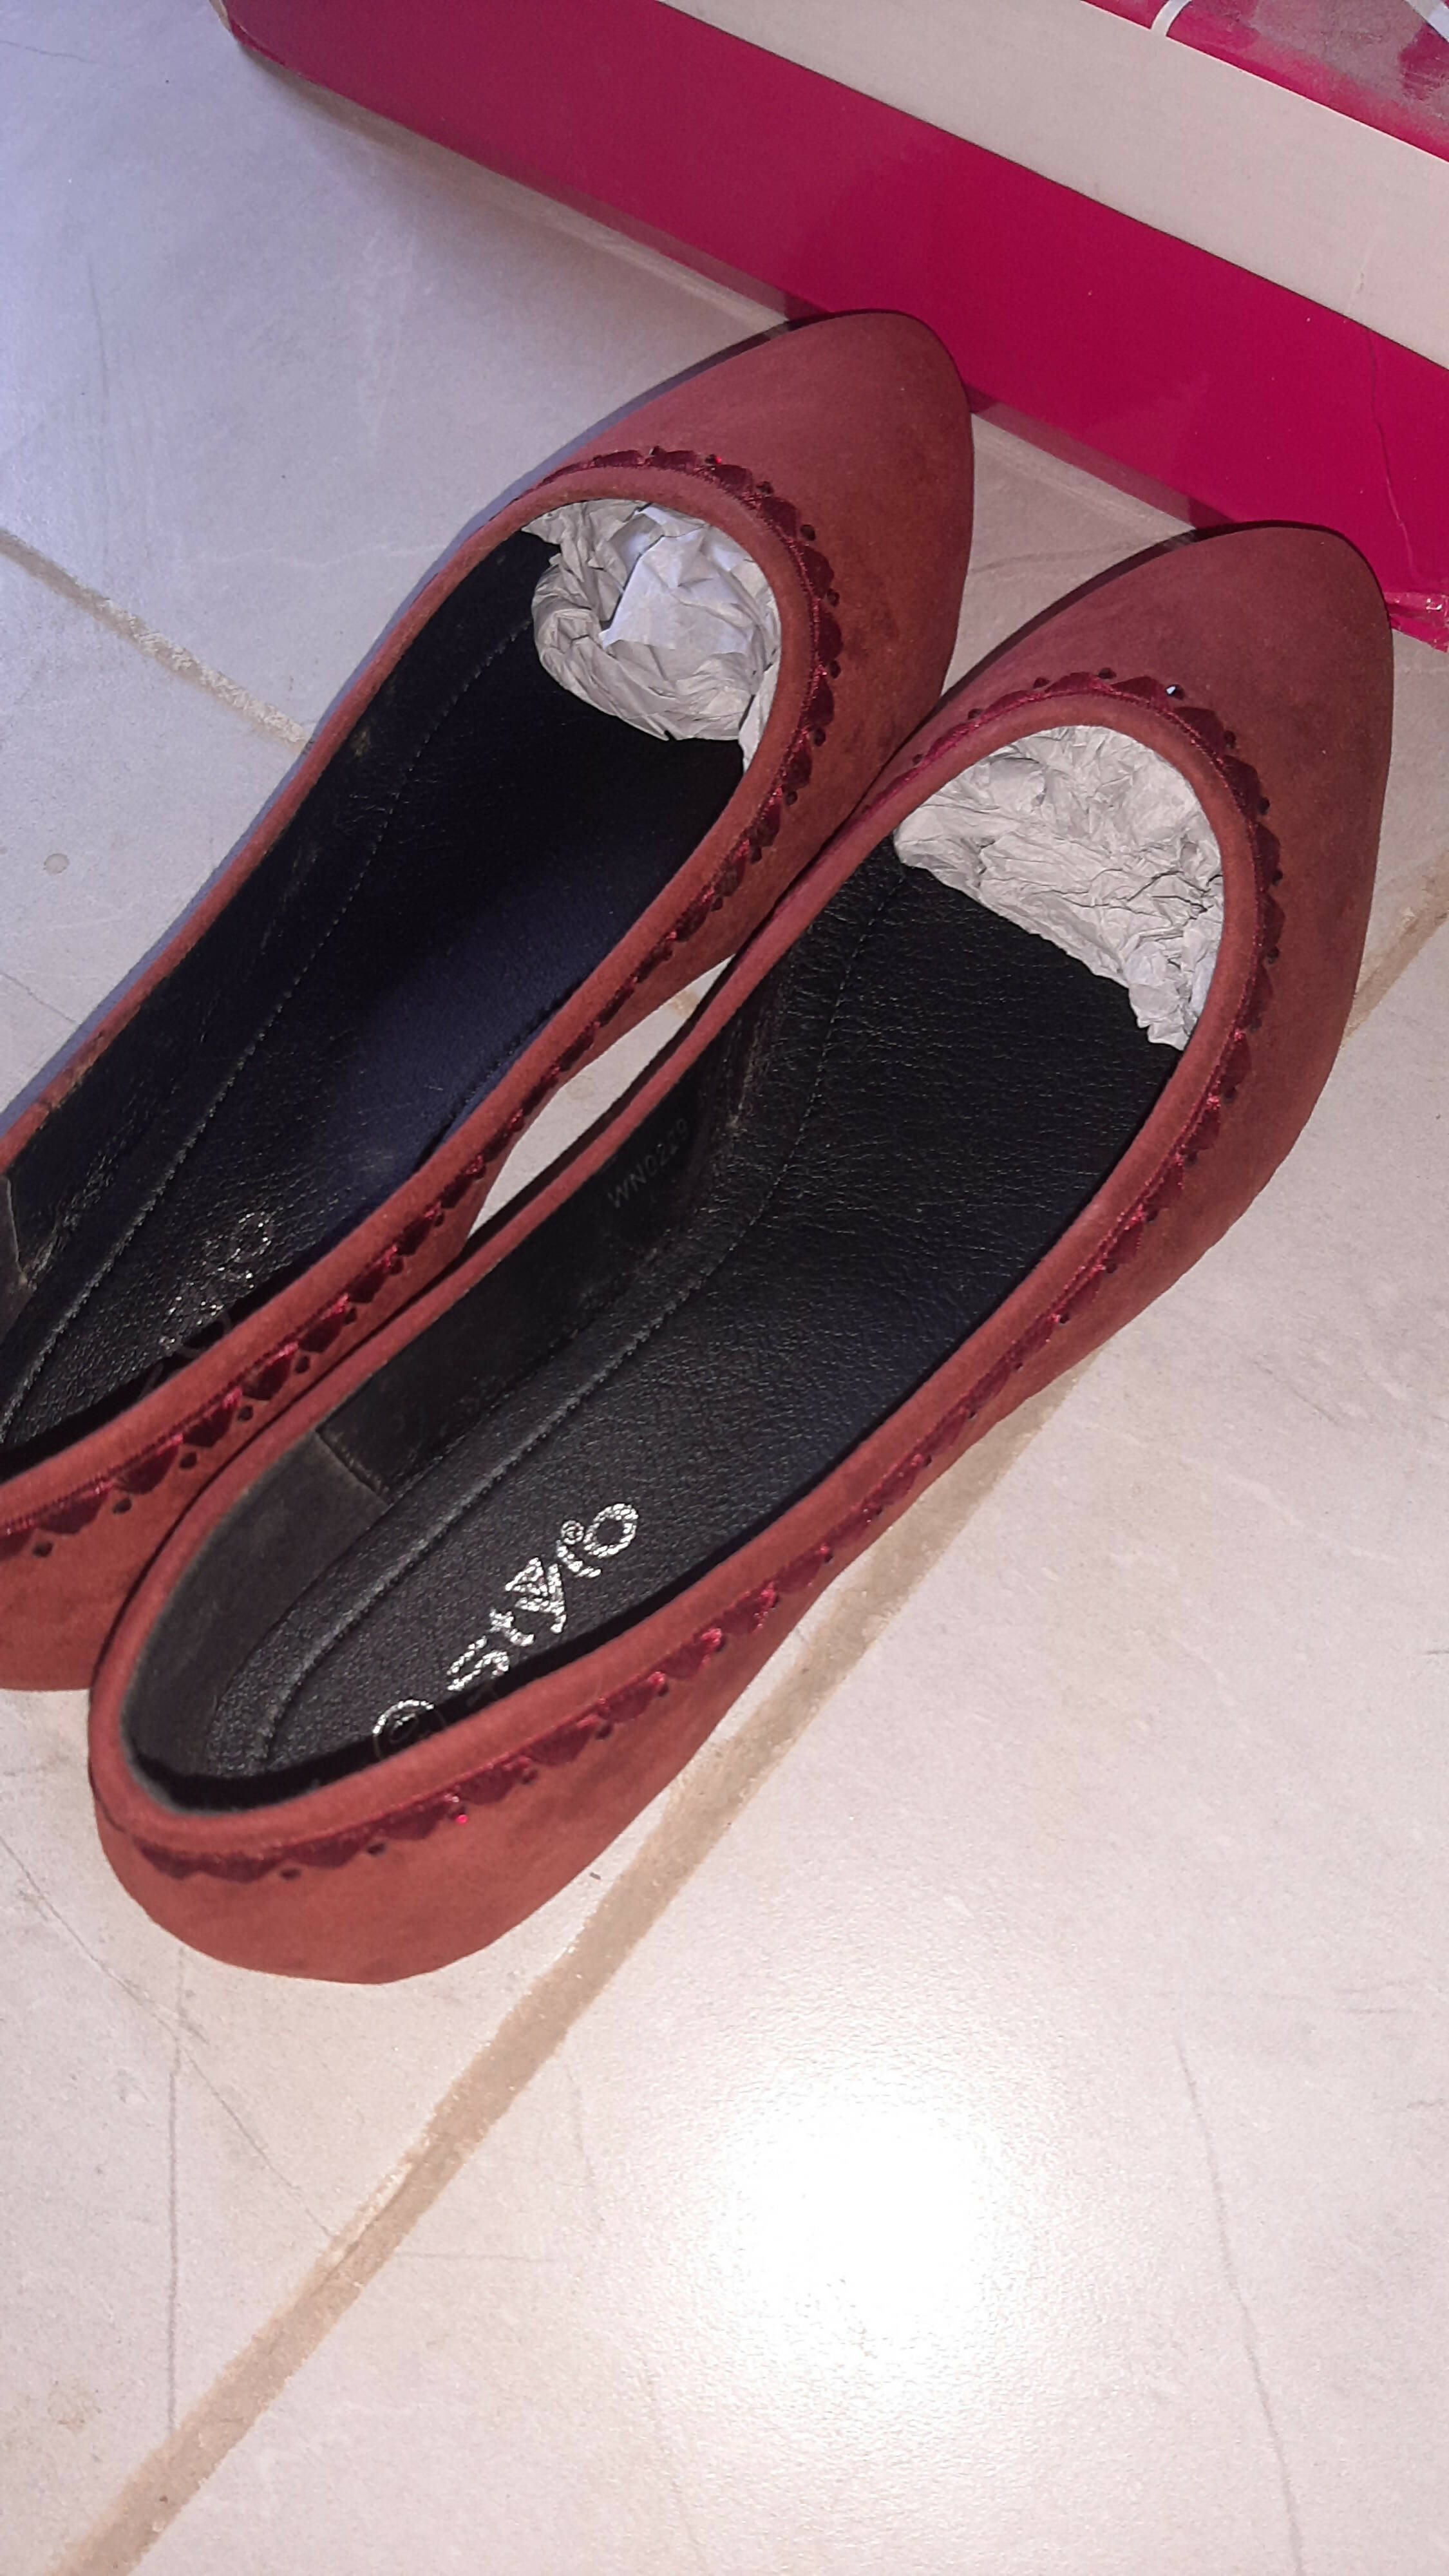 Stylo | Maroon Shoes | Women Shoes | Brand New